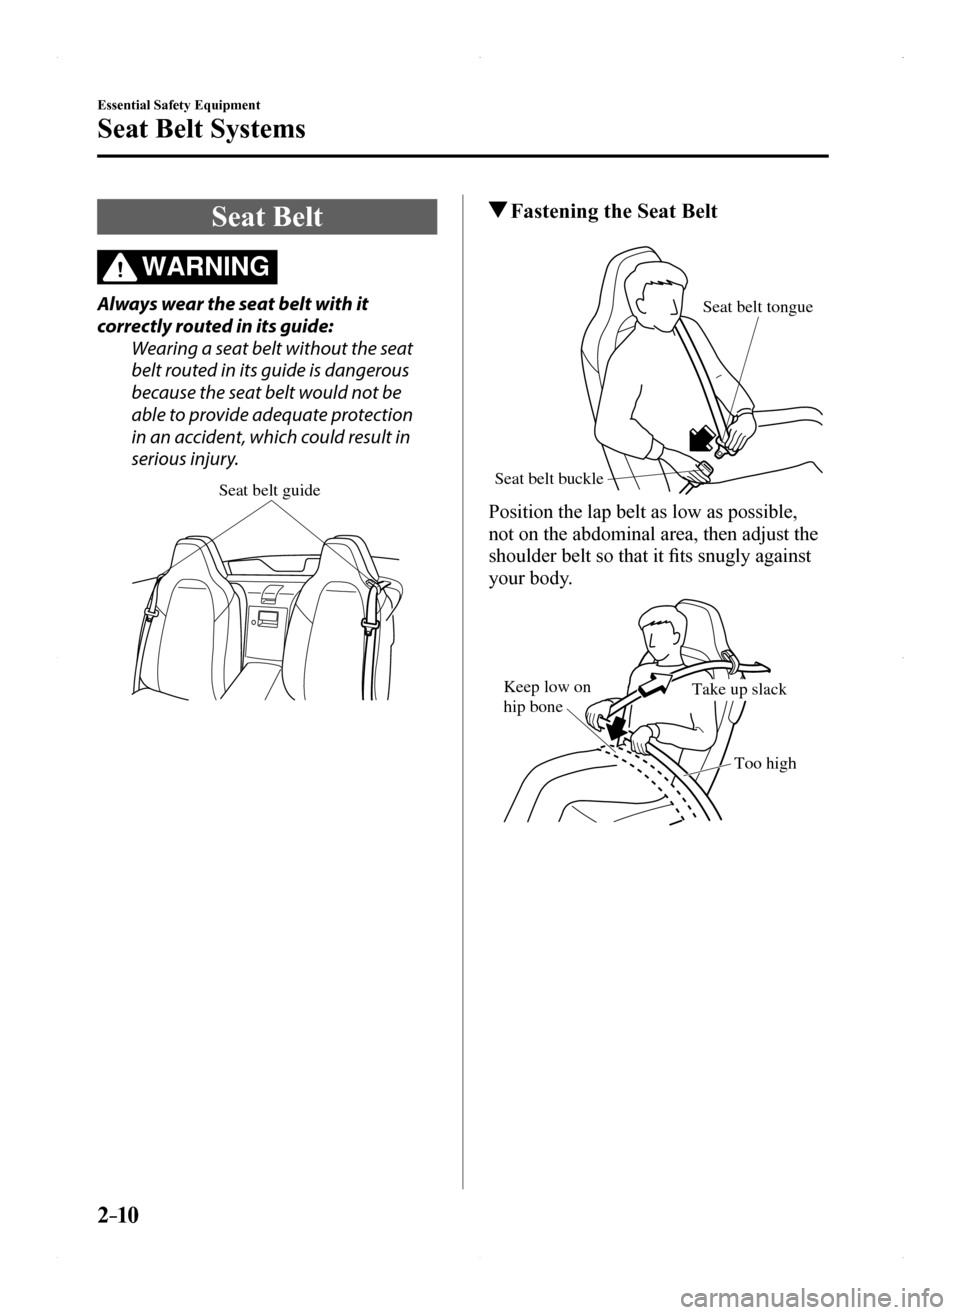 MAZDA MODEL MX-5 2016  Owners Manual (in English) 2–10
Essential Safety Equipment
Seat Belt Systems
Seat Belt
WARNING
Always wear the seat belt with it 
correctly routed in its guide:
Wearing a seat belt without the seat 
belt routed in its guide i